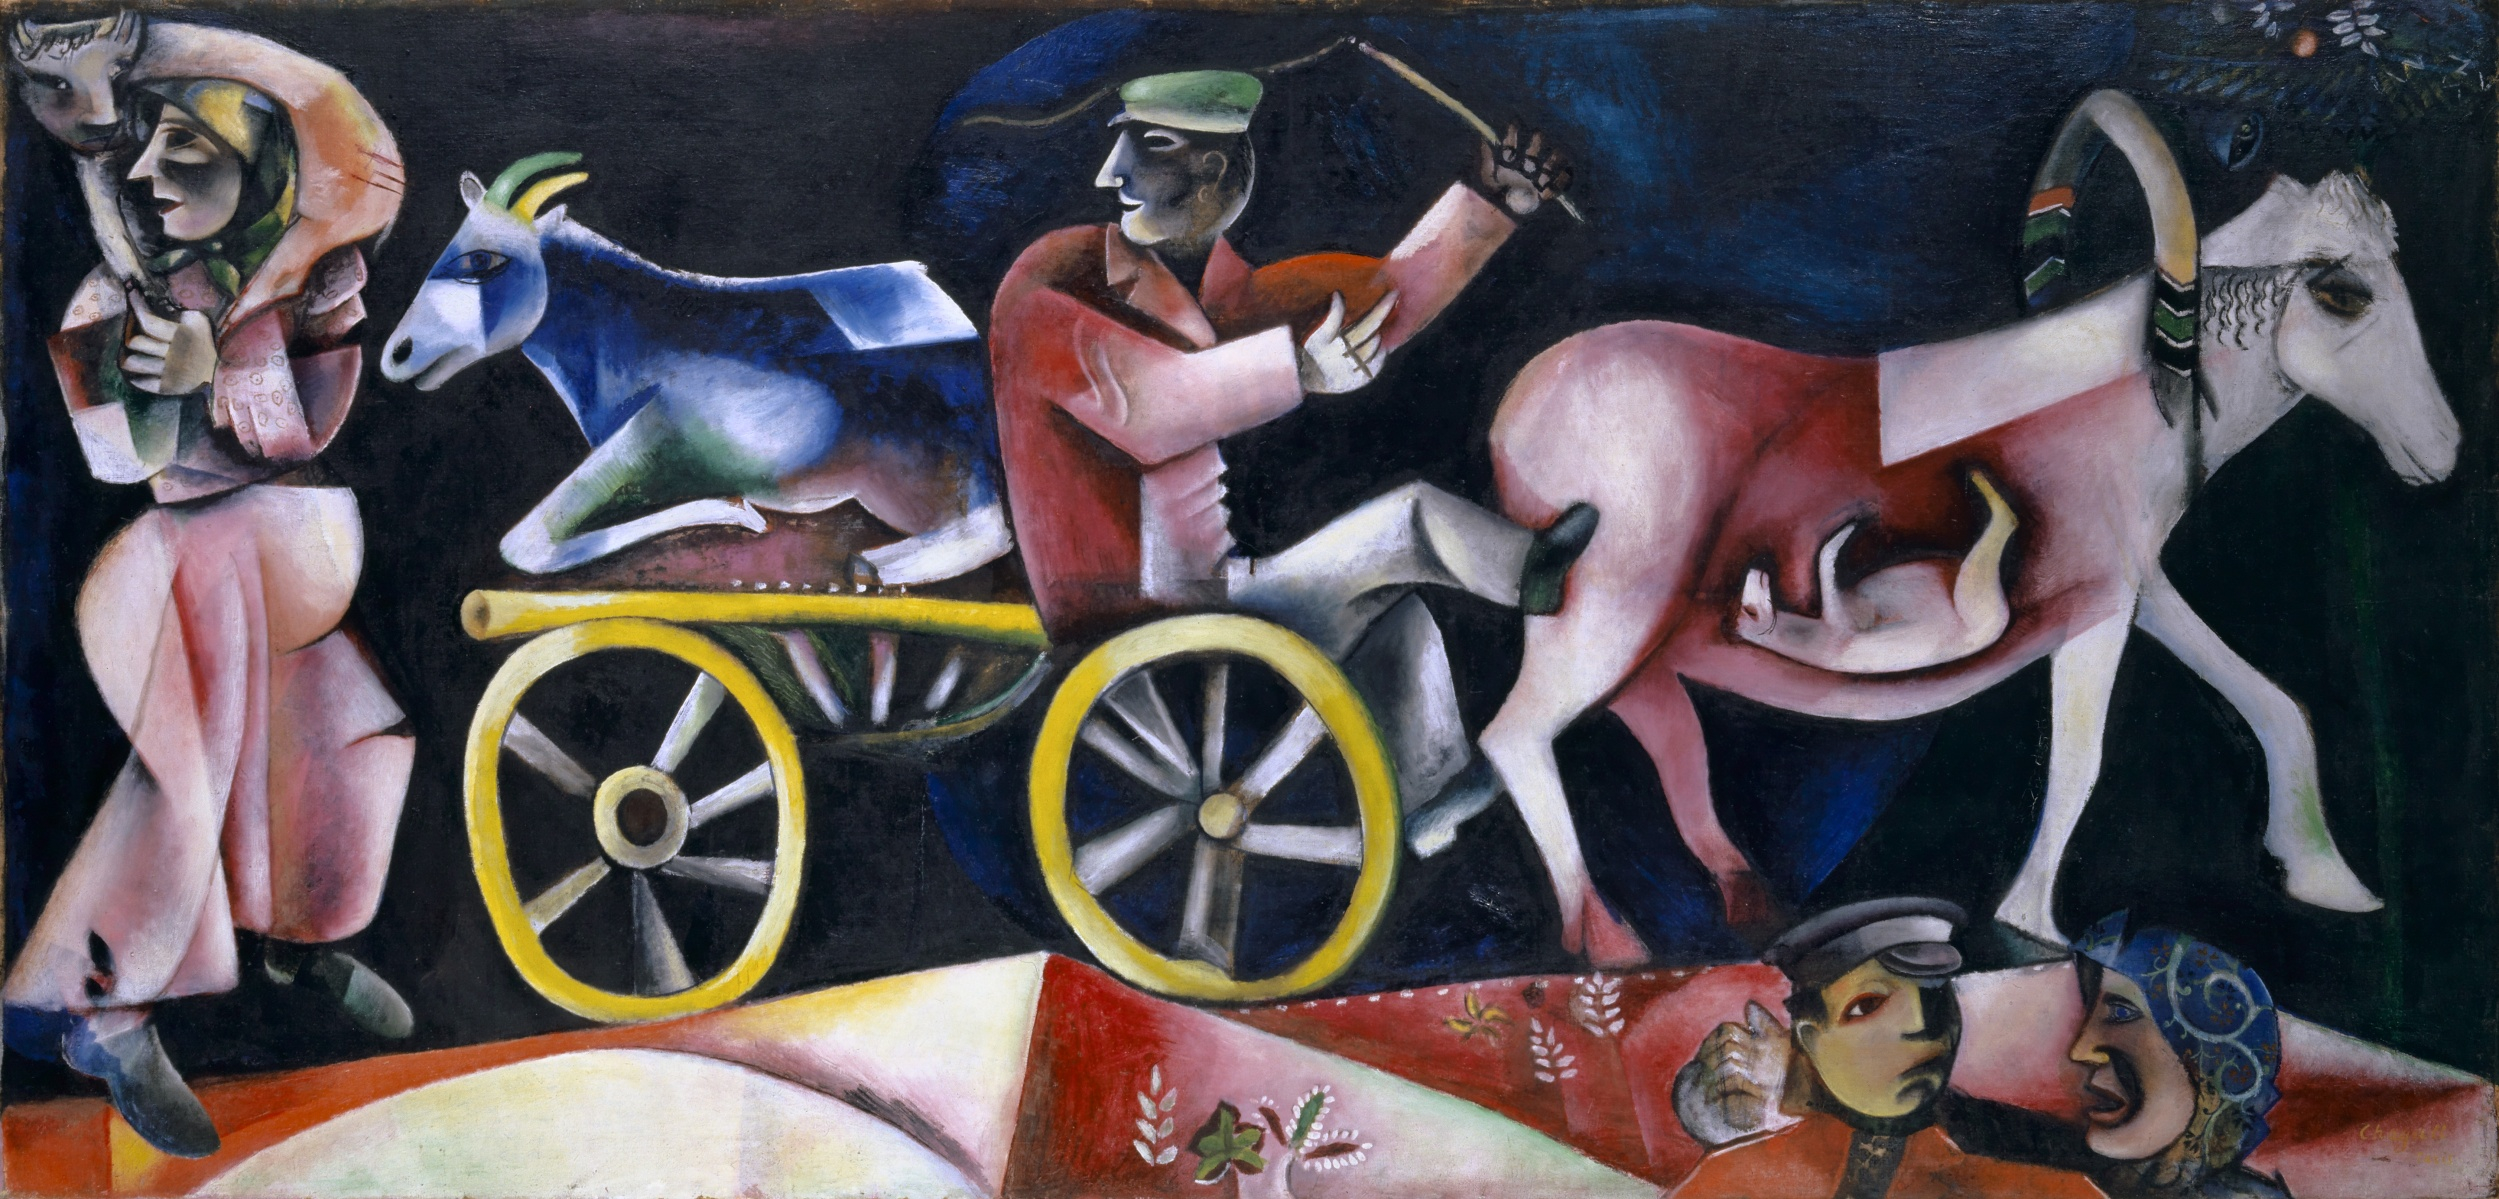 Marc's 2012 painting 'The Cattle Dealer' shows the free-ranging uses of color and form that fueled his artistic ascent. In later works, he'd send human and animal figures airborne: hence the 'Flying Lovers' of the play's title.